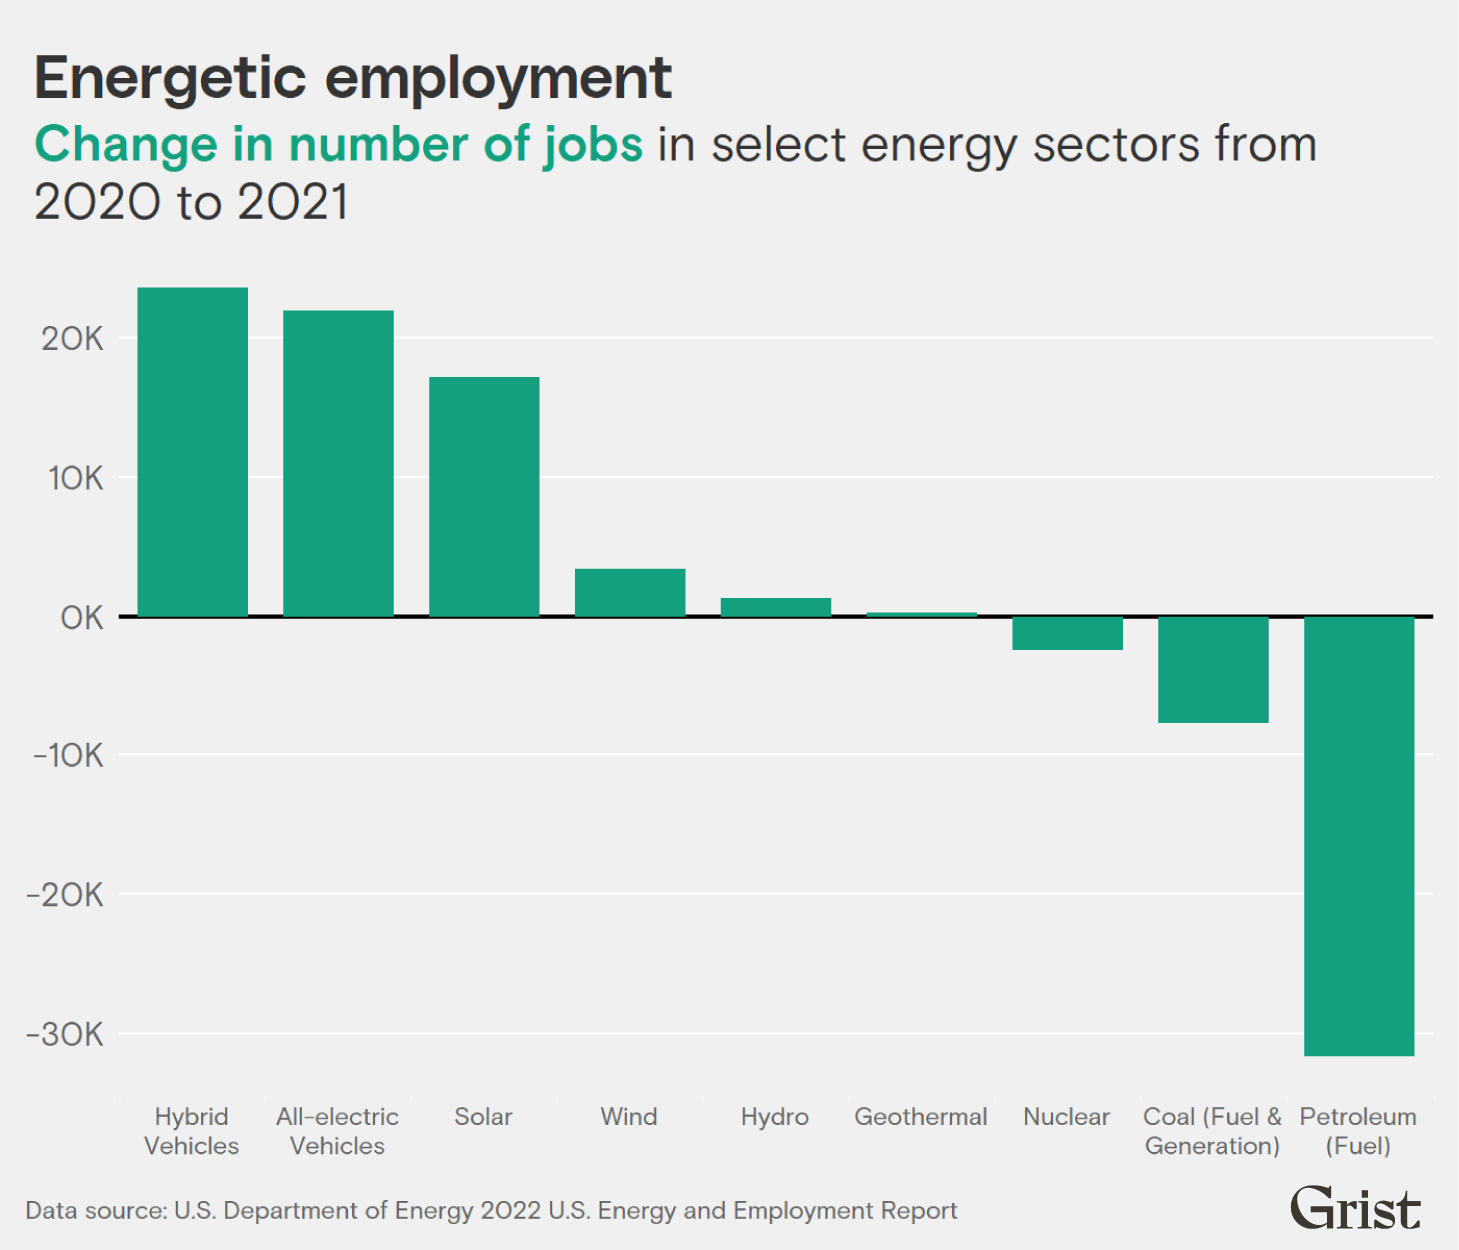 A bar graphing showing changes in employment for different parts of the energy sector. Hybrid vehicles and all-electric vehicles each added over 20,000 new jobs while, petroleum lost over 30,000 jobs, and coal almost 10,000 jobs.